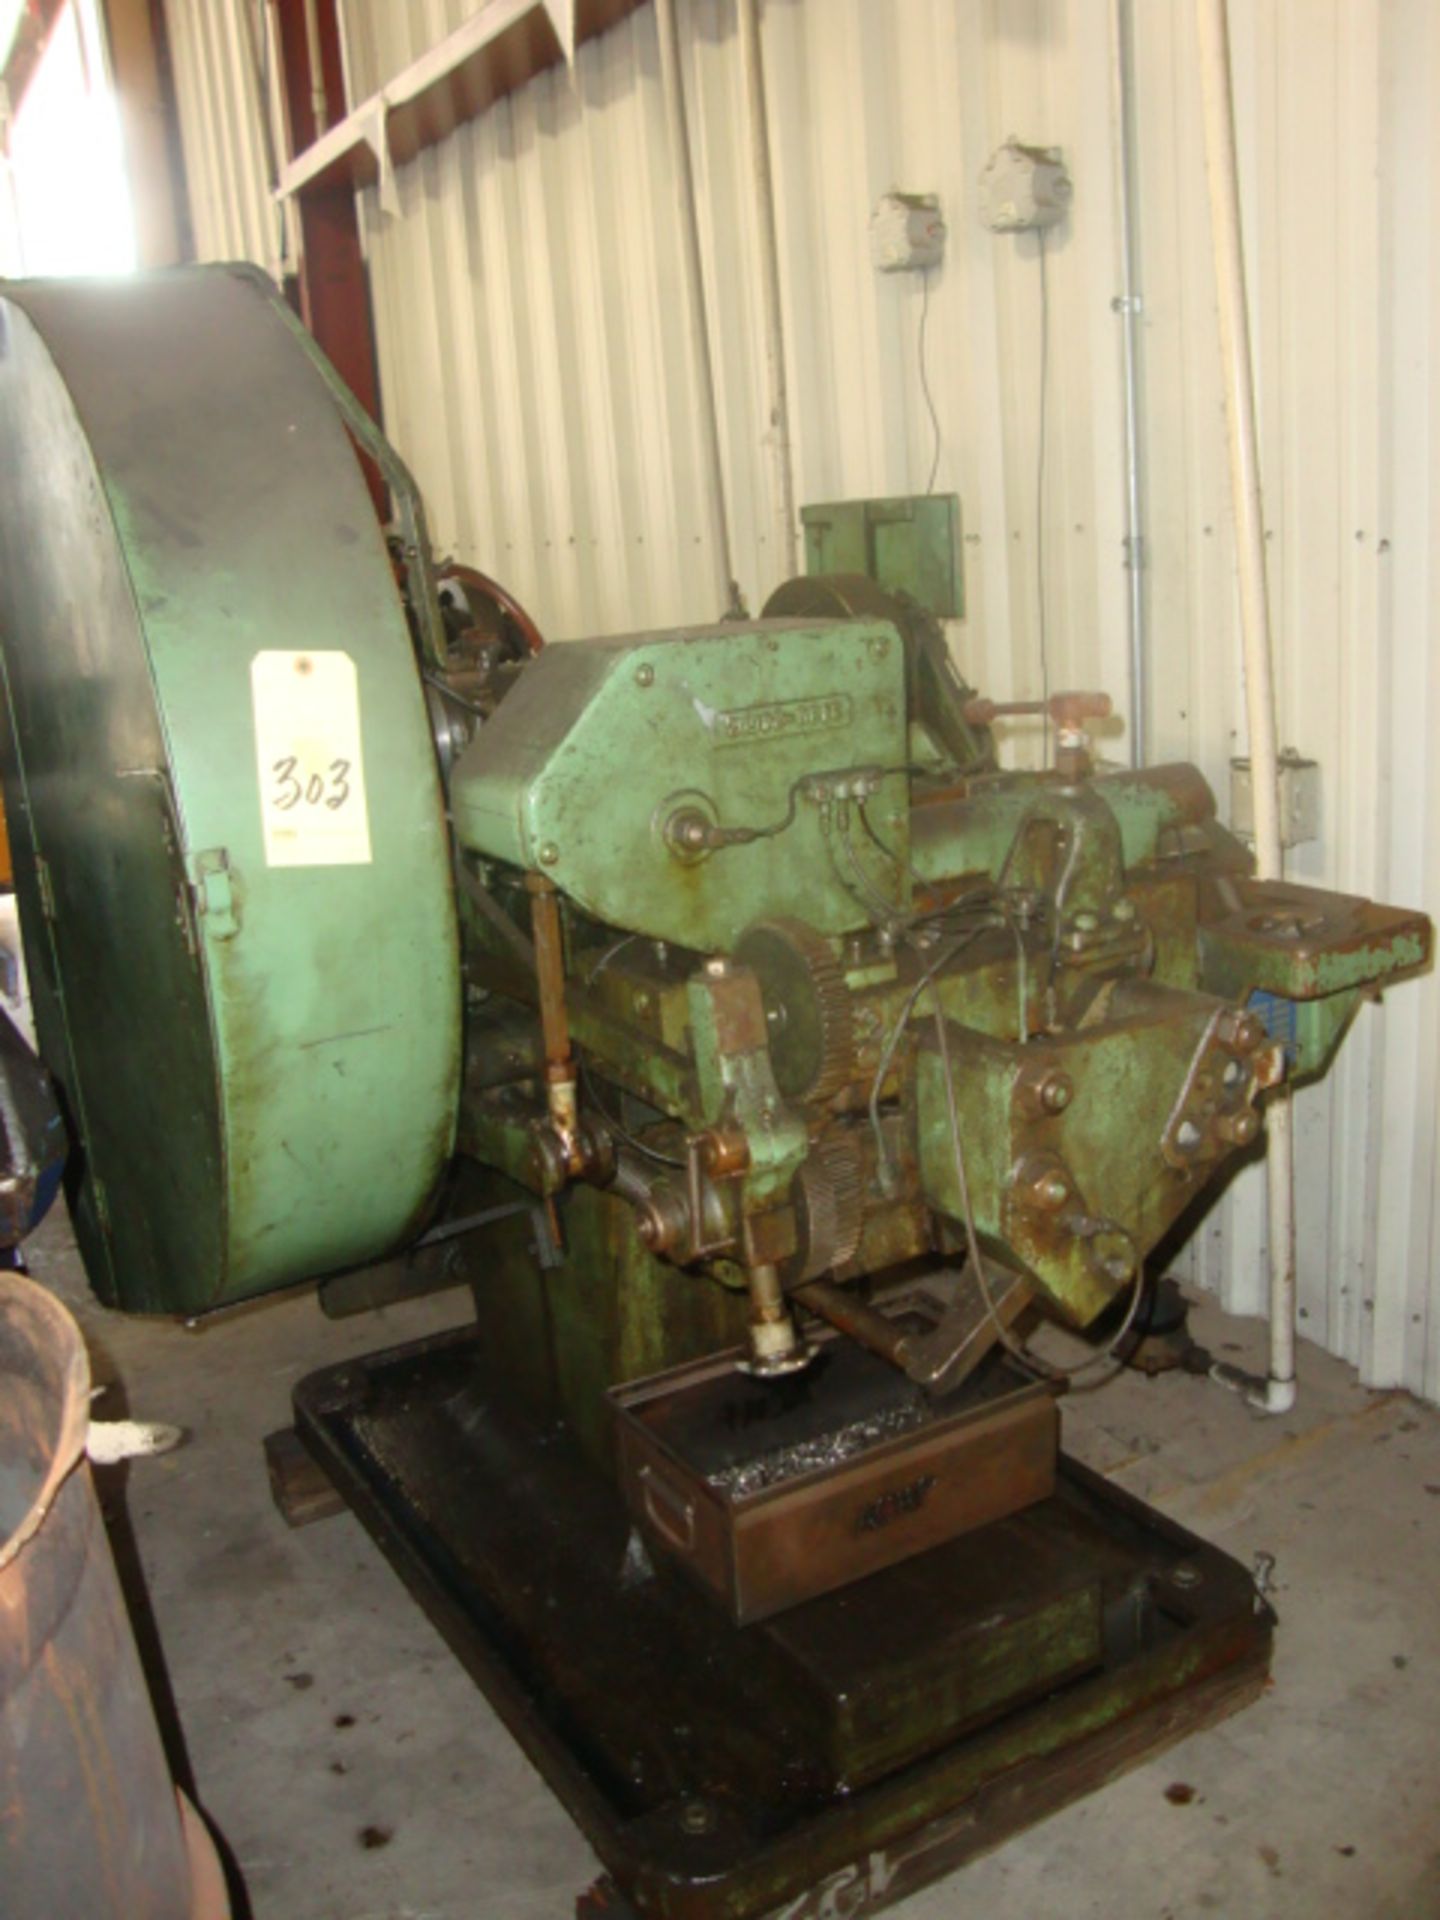 SINGLE DIE DOUBLE STROKE TOGGLE COLD HEADER, WATERBURY FARREL NO. 1  (currently off-line & used